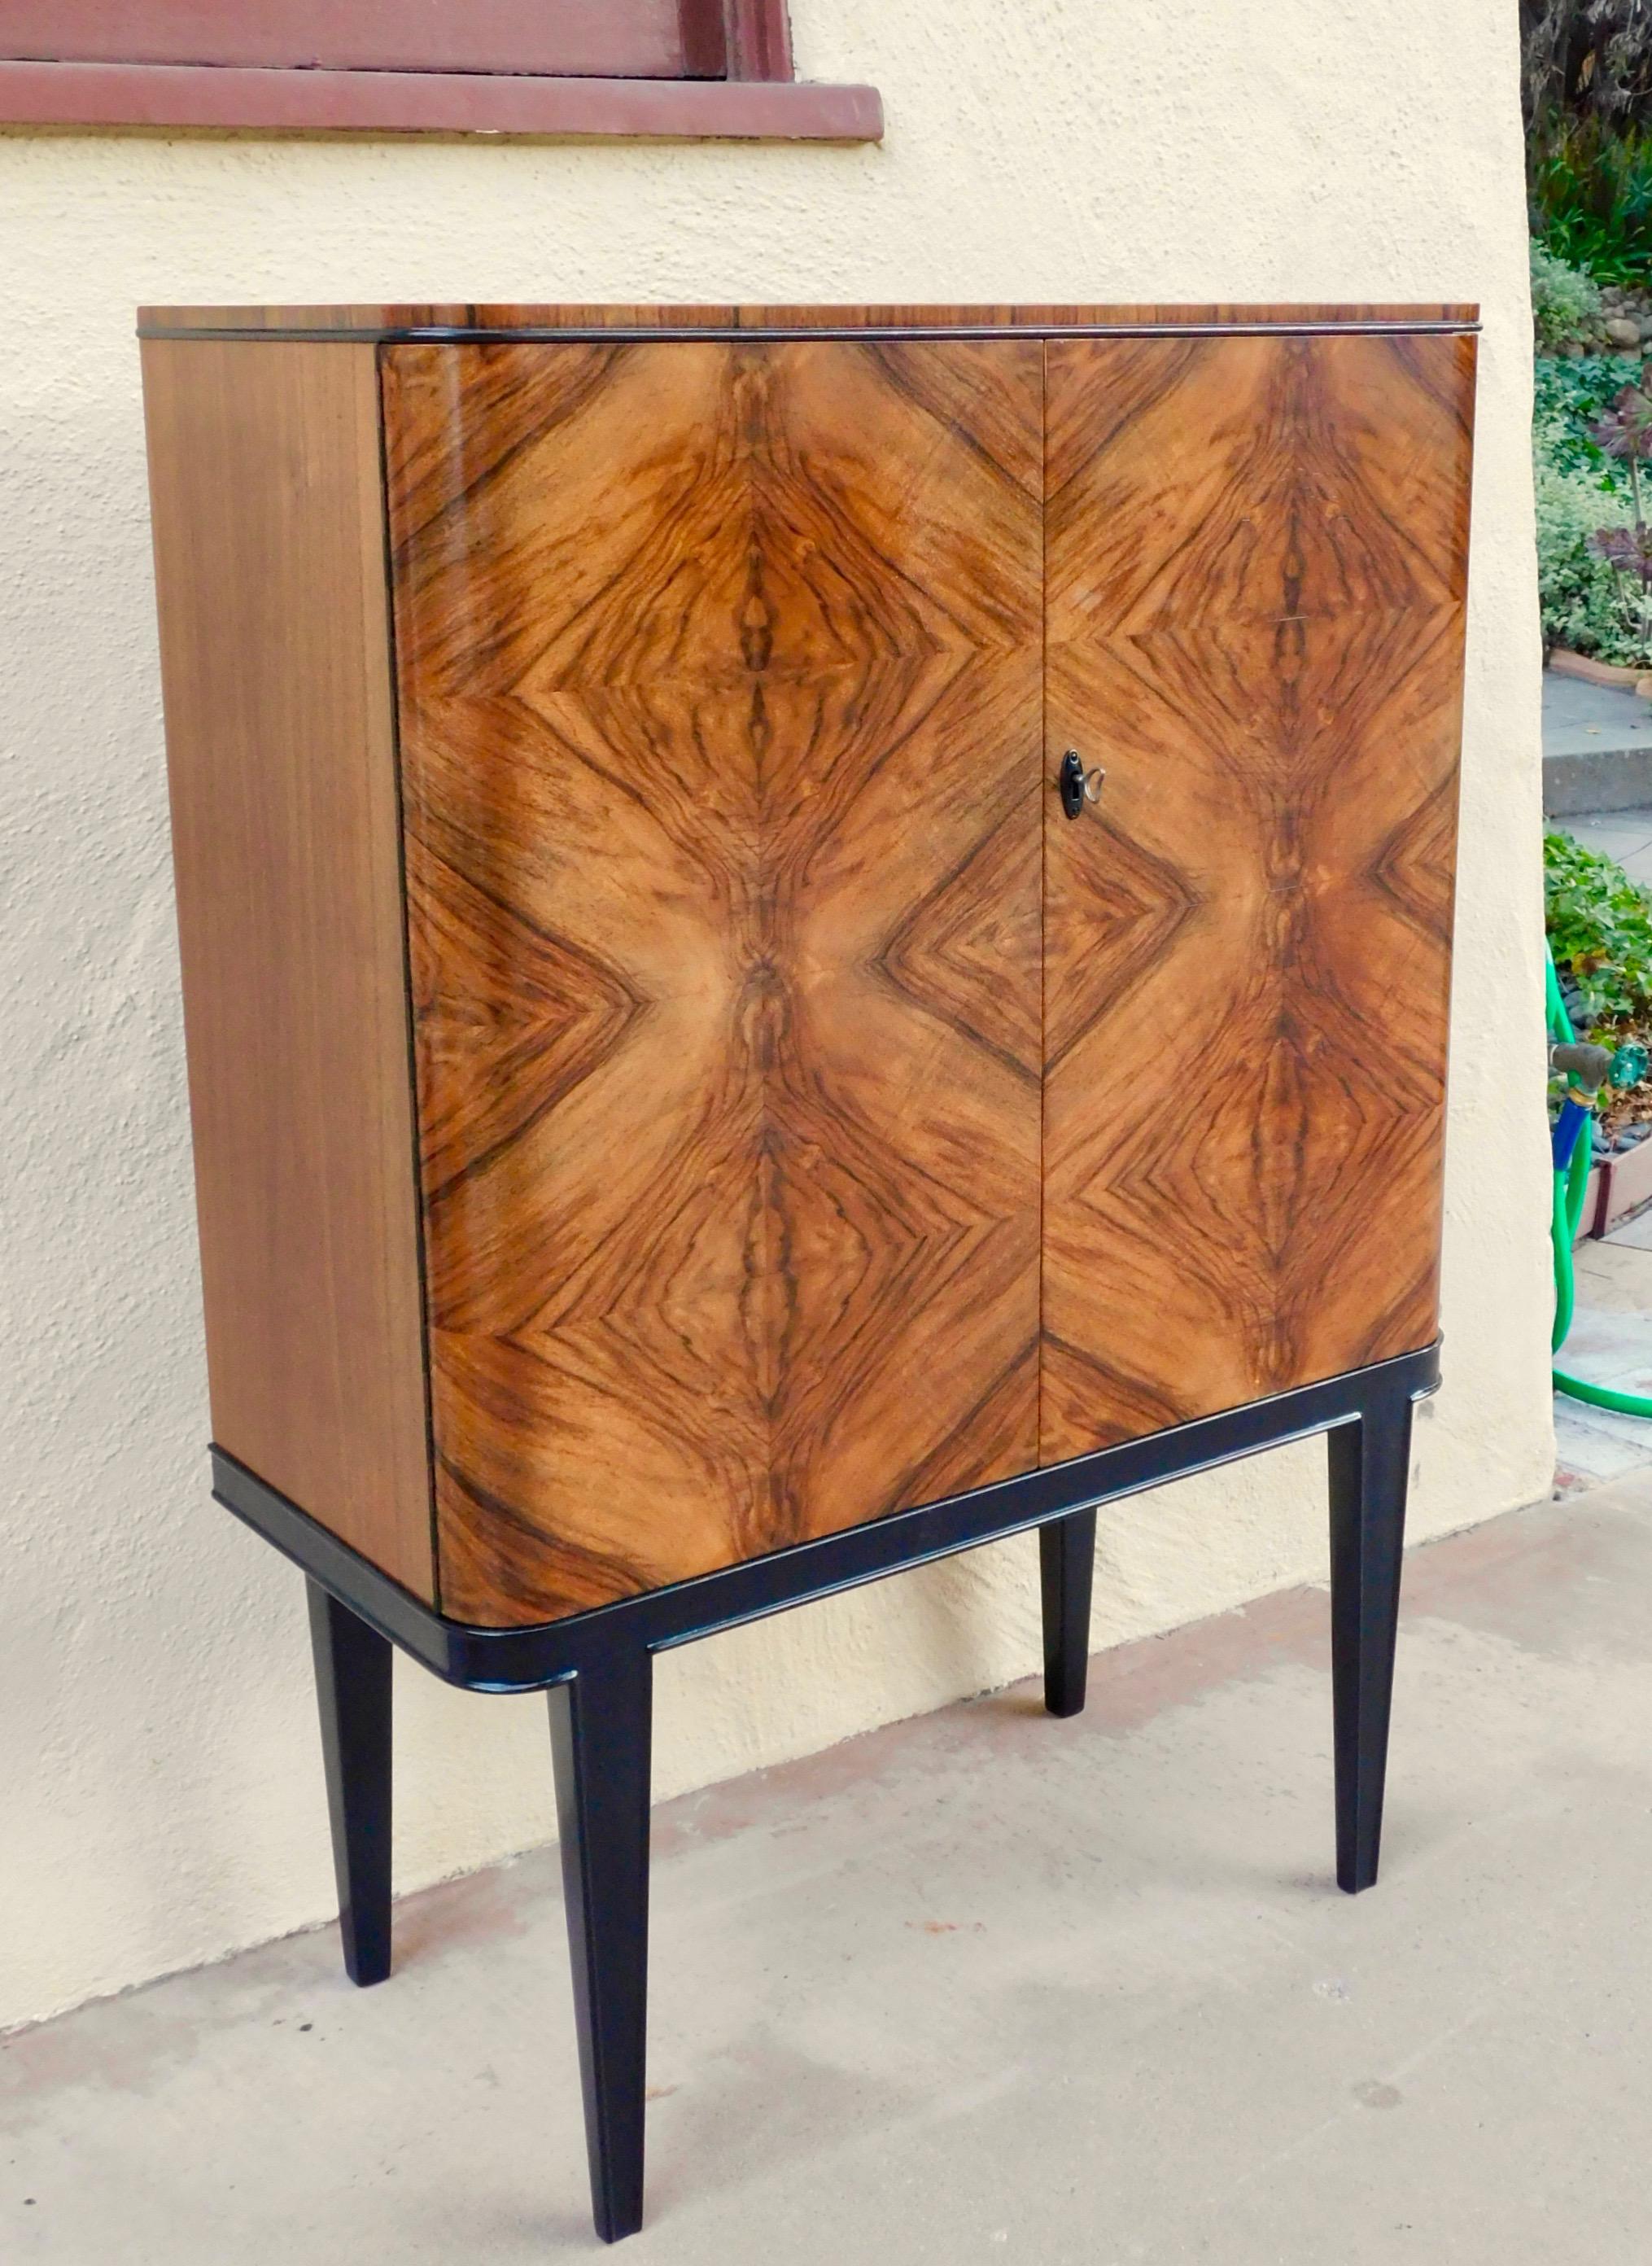 Swedish art moderne dry bar or sideboard in bookmatched, highly figured walnut.
Made at Lingstroms in Sweden, circa 1940. Interior is composed of drawers and adjustable/removable shelves-you can see the shelves (they are not pictured assembled) in